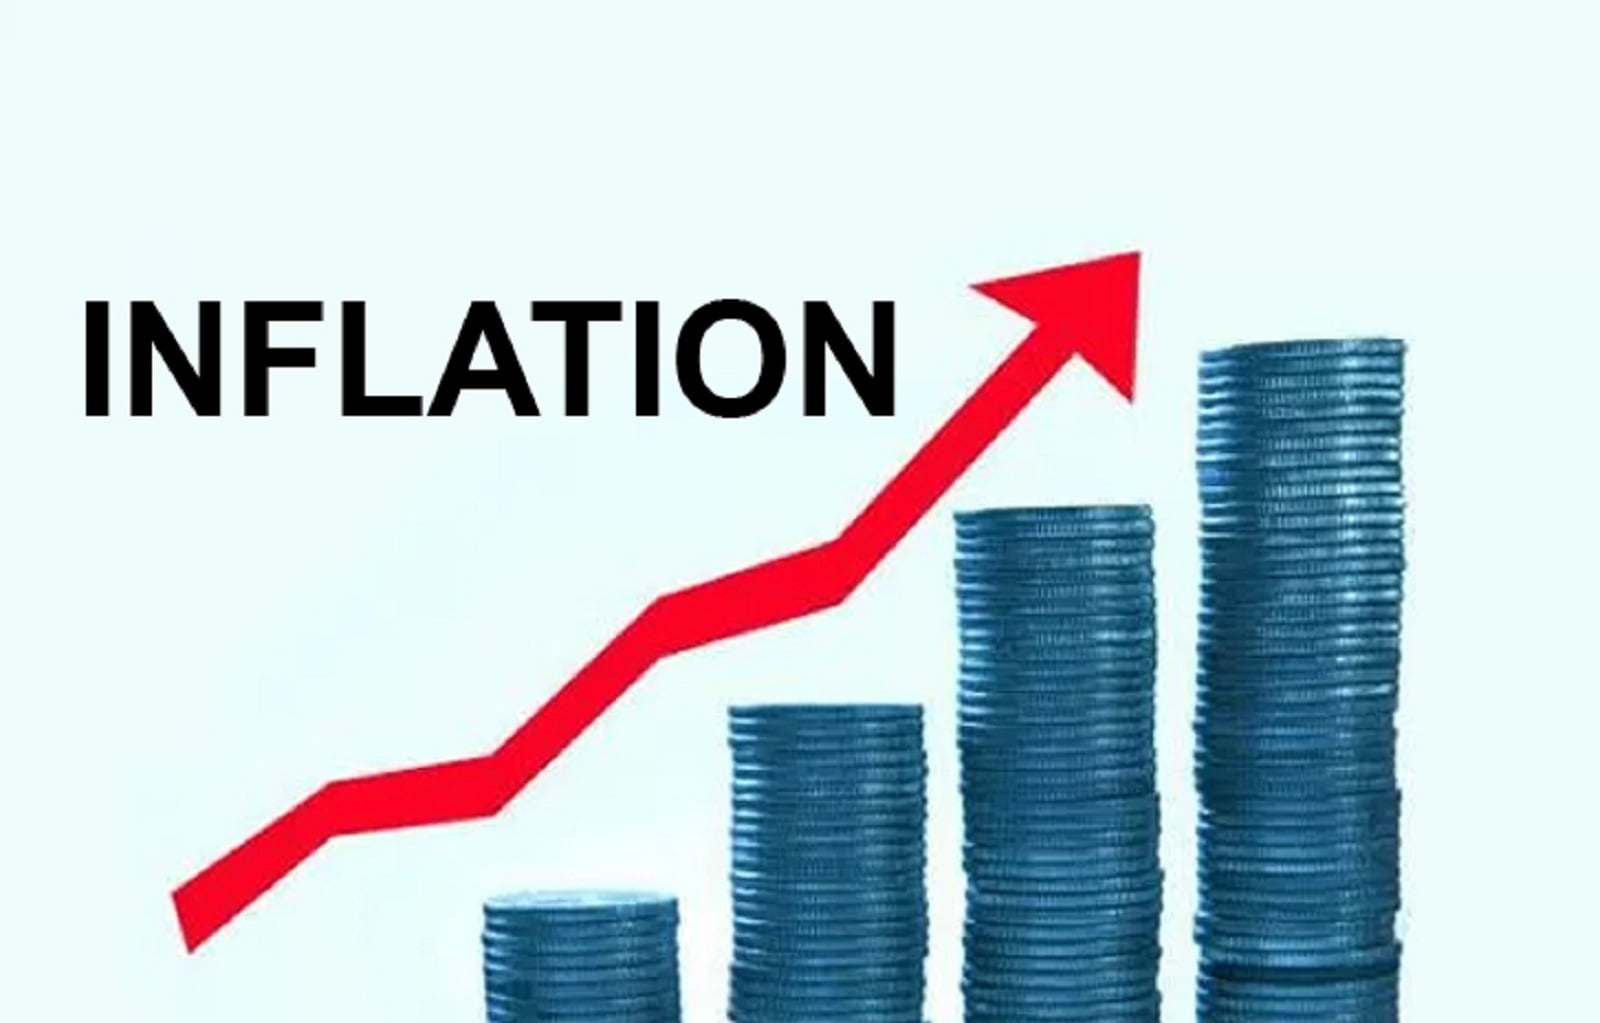 Inflation Rate In Nigeria Increases By 0.23%, Now 15.63% - NBS